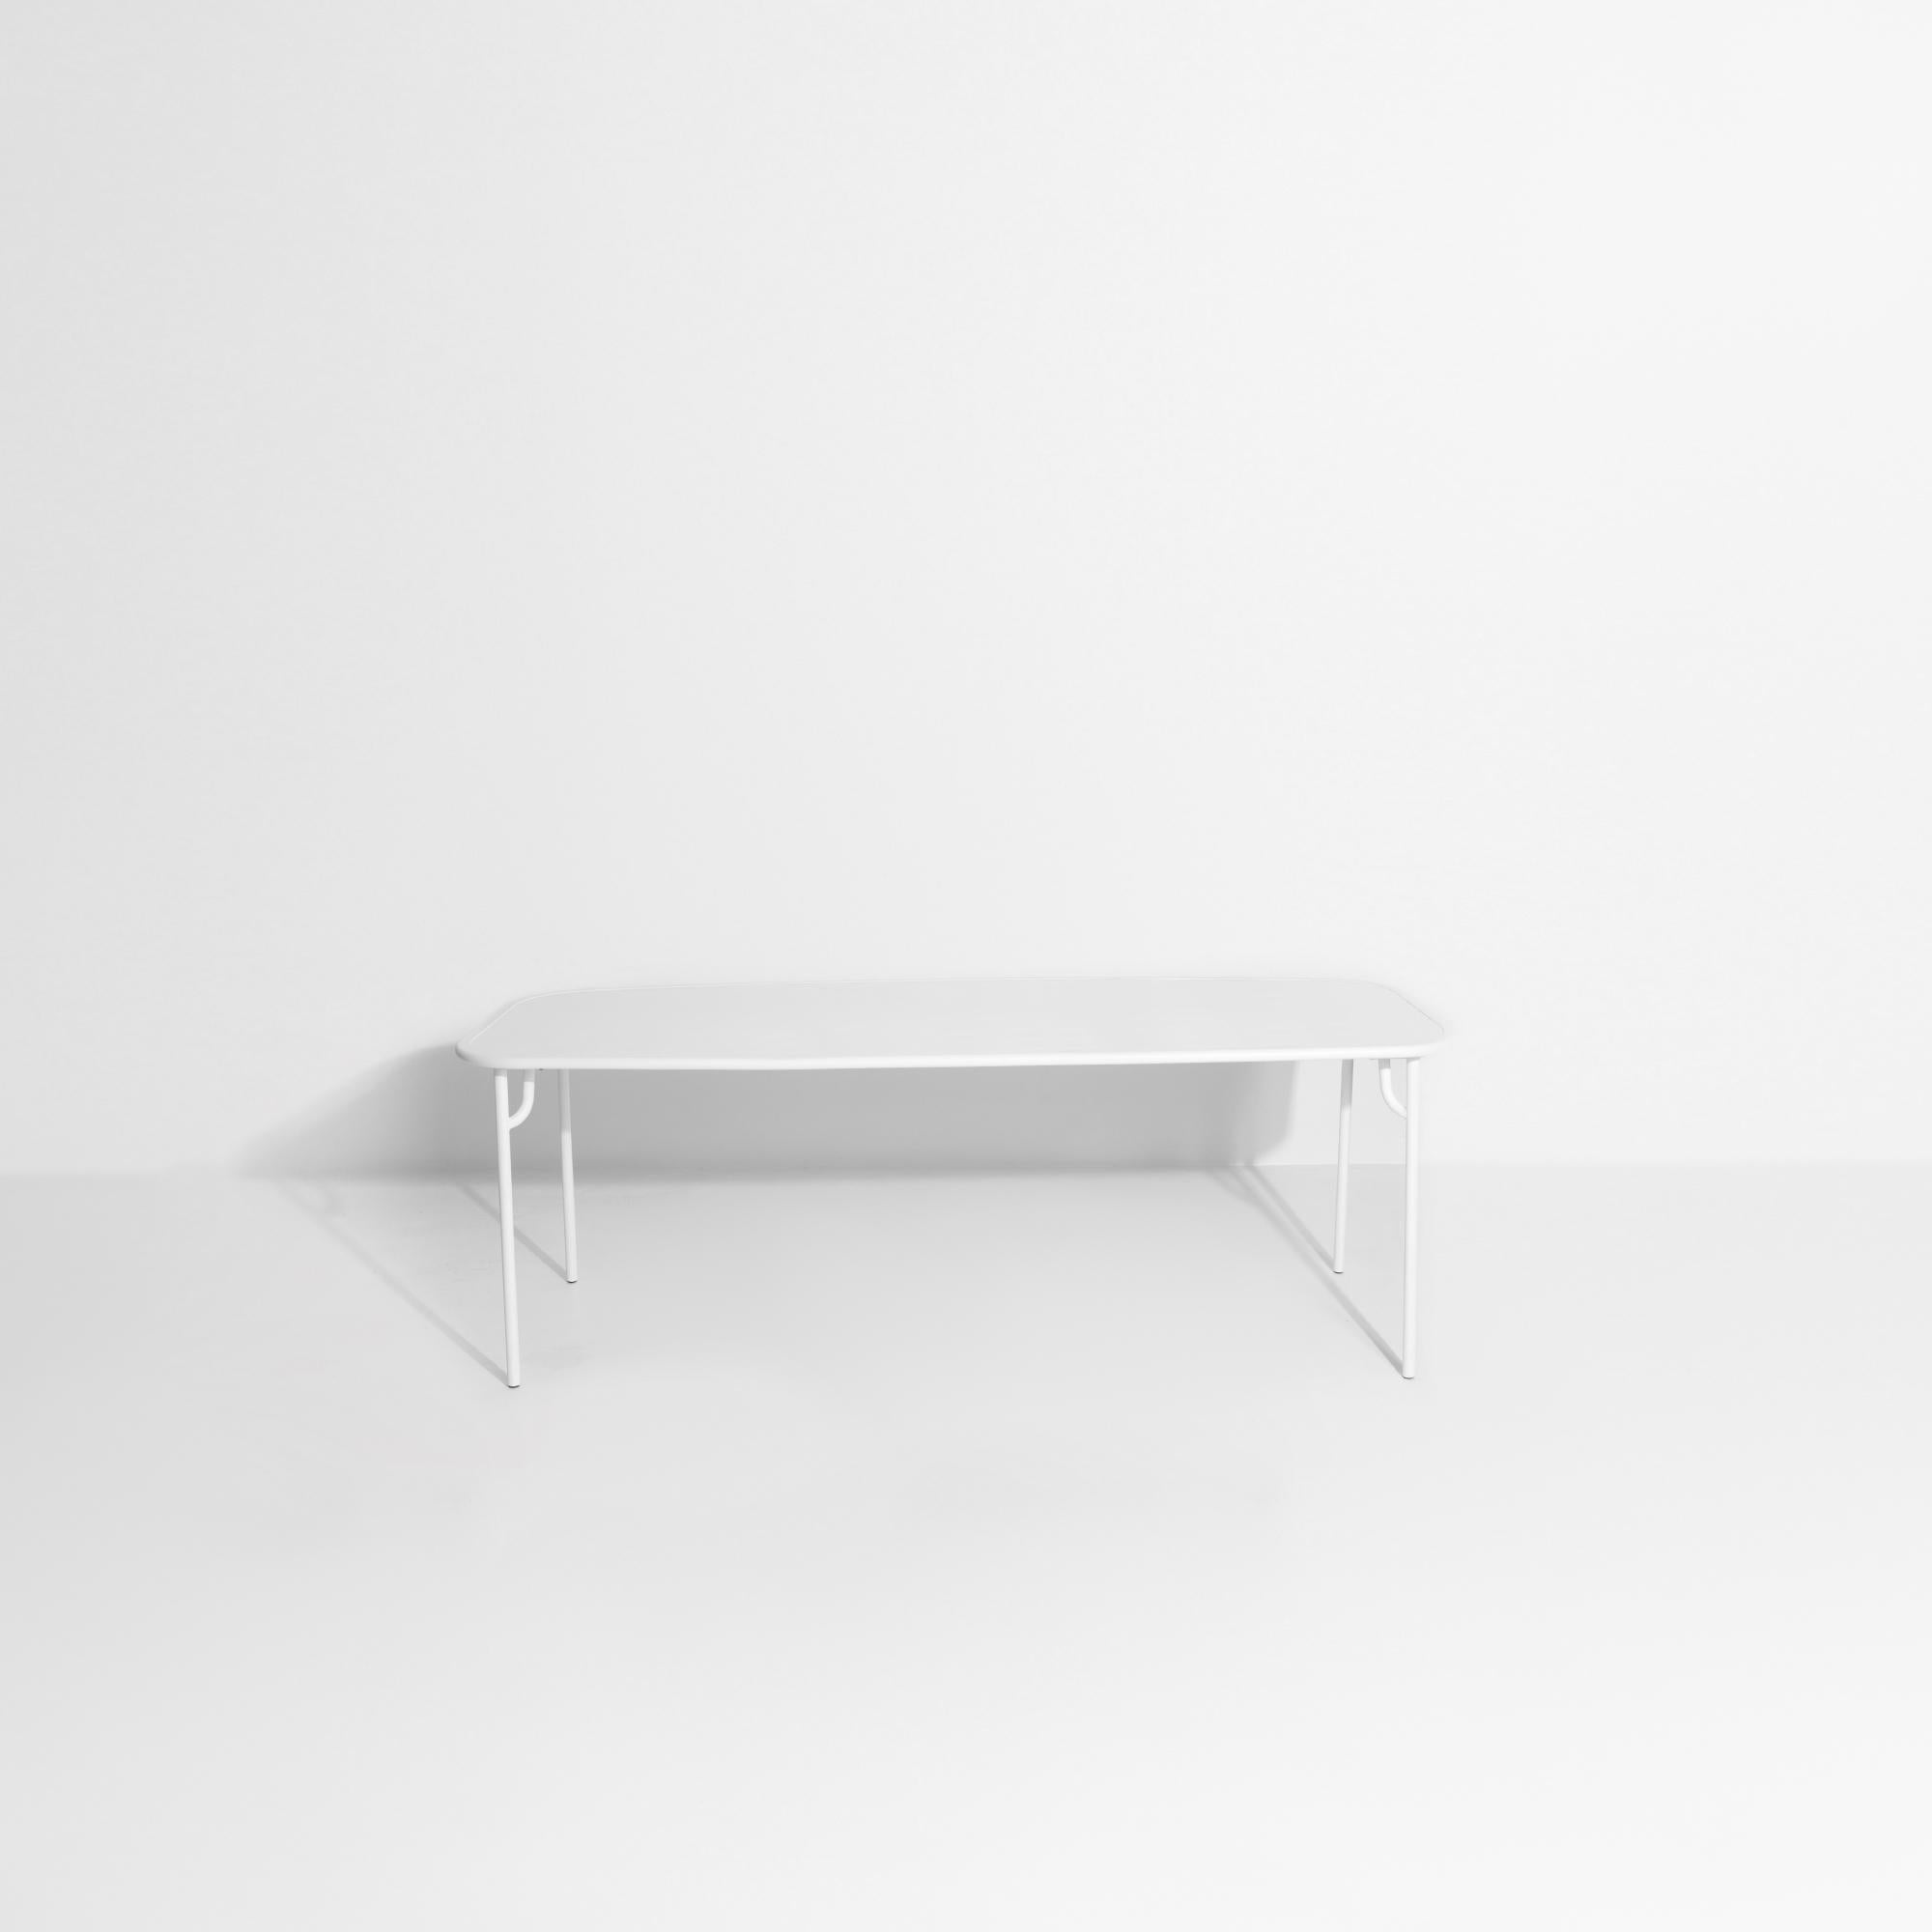 Petite Friture Week-End Large Plain Rectangular Dining Table in White Aluminium In New Condition For Sale In Brooklyn, NY